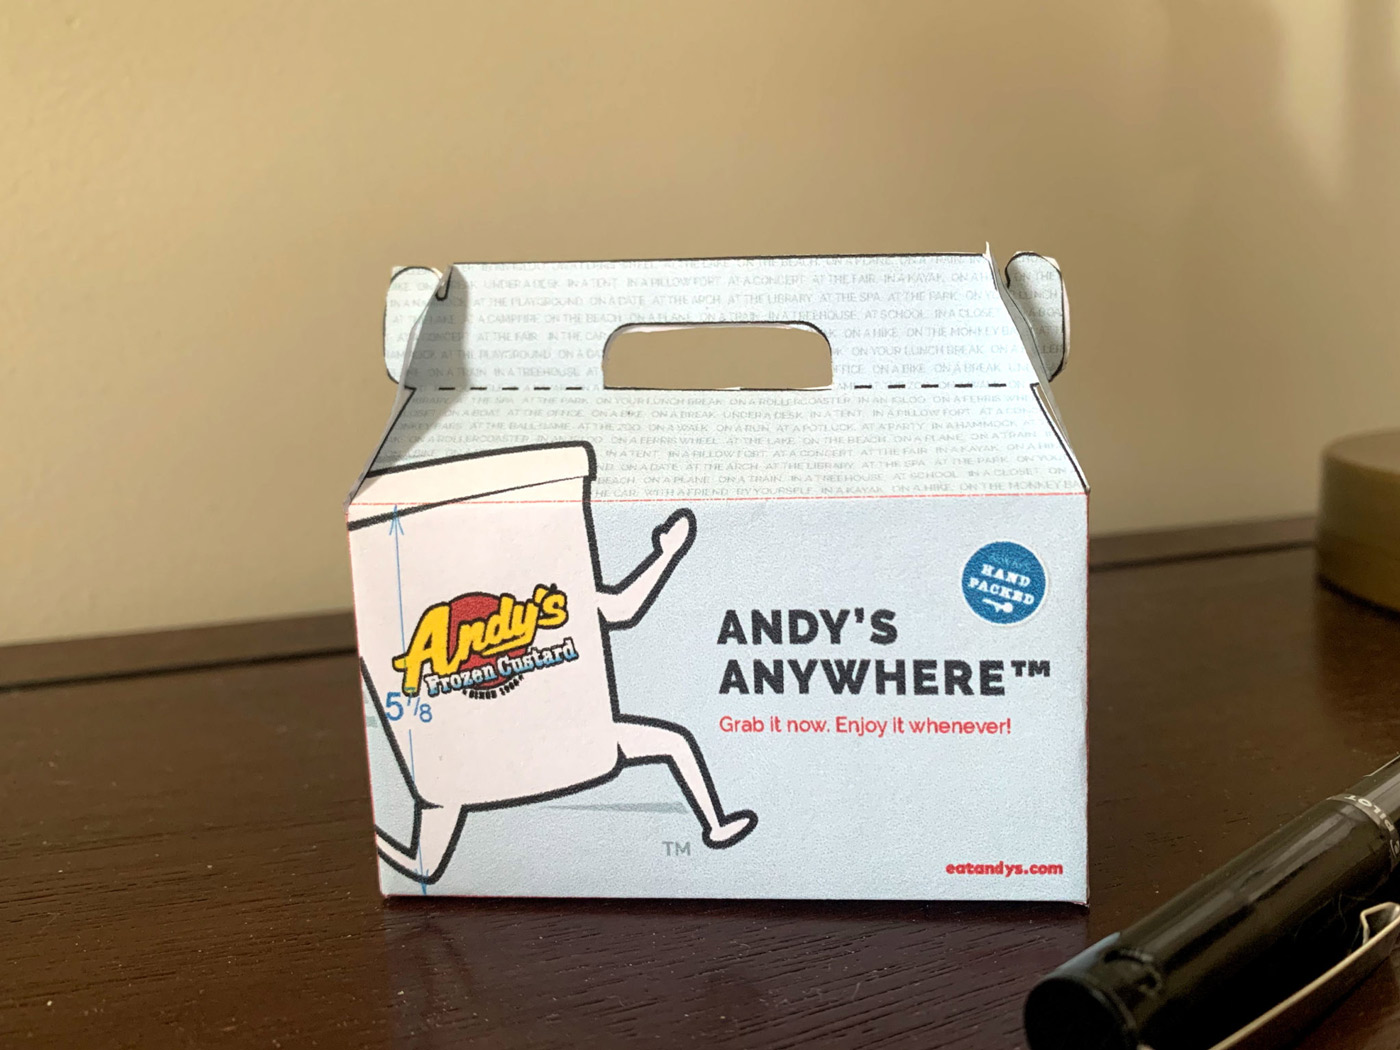 A mini prototype shows a mockup of the Andy's Anywhere carrier case packaging design